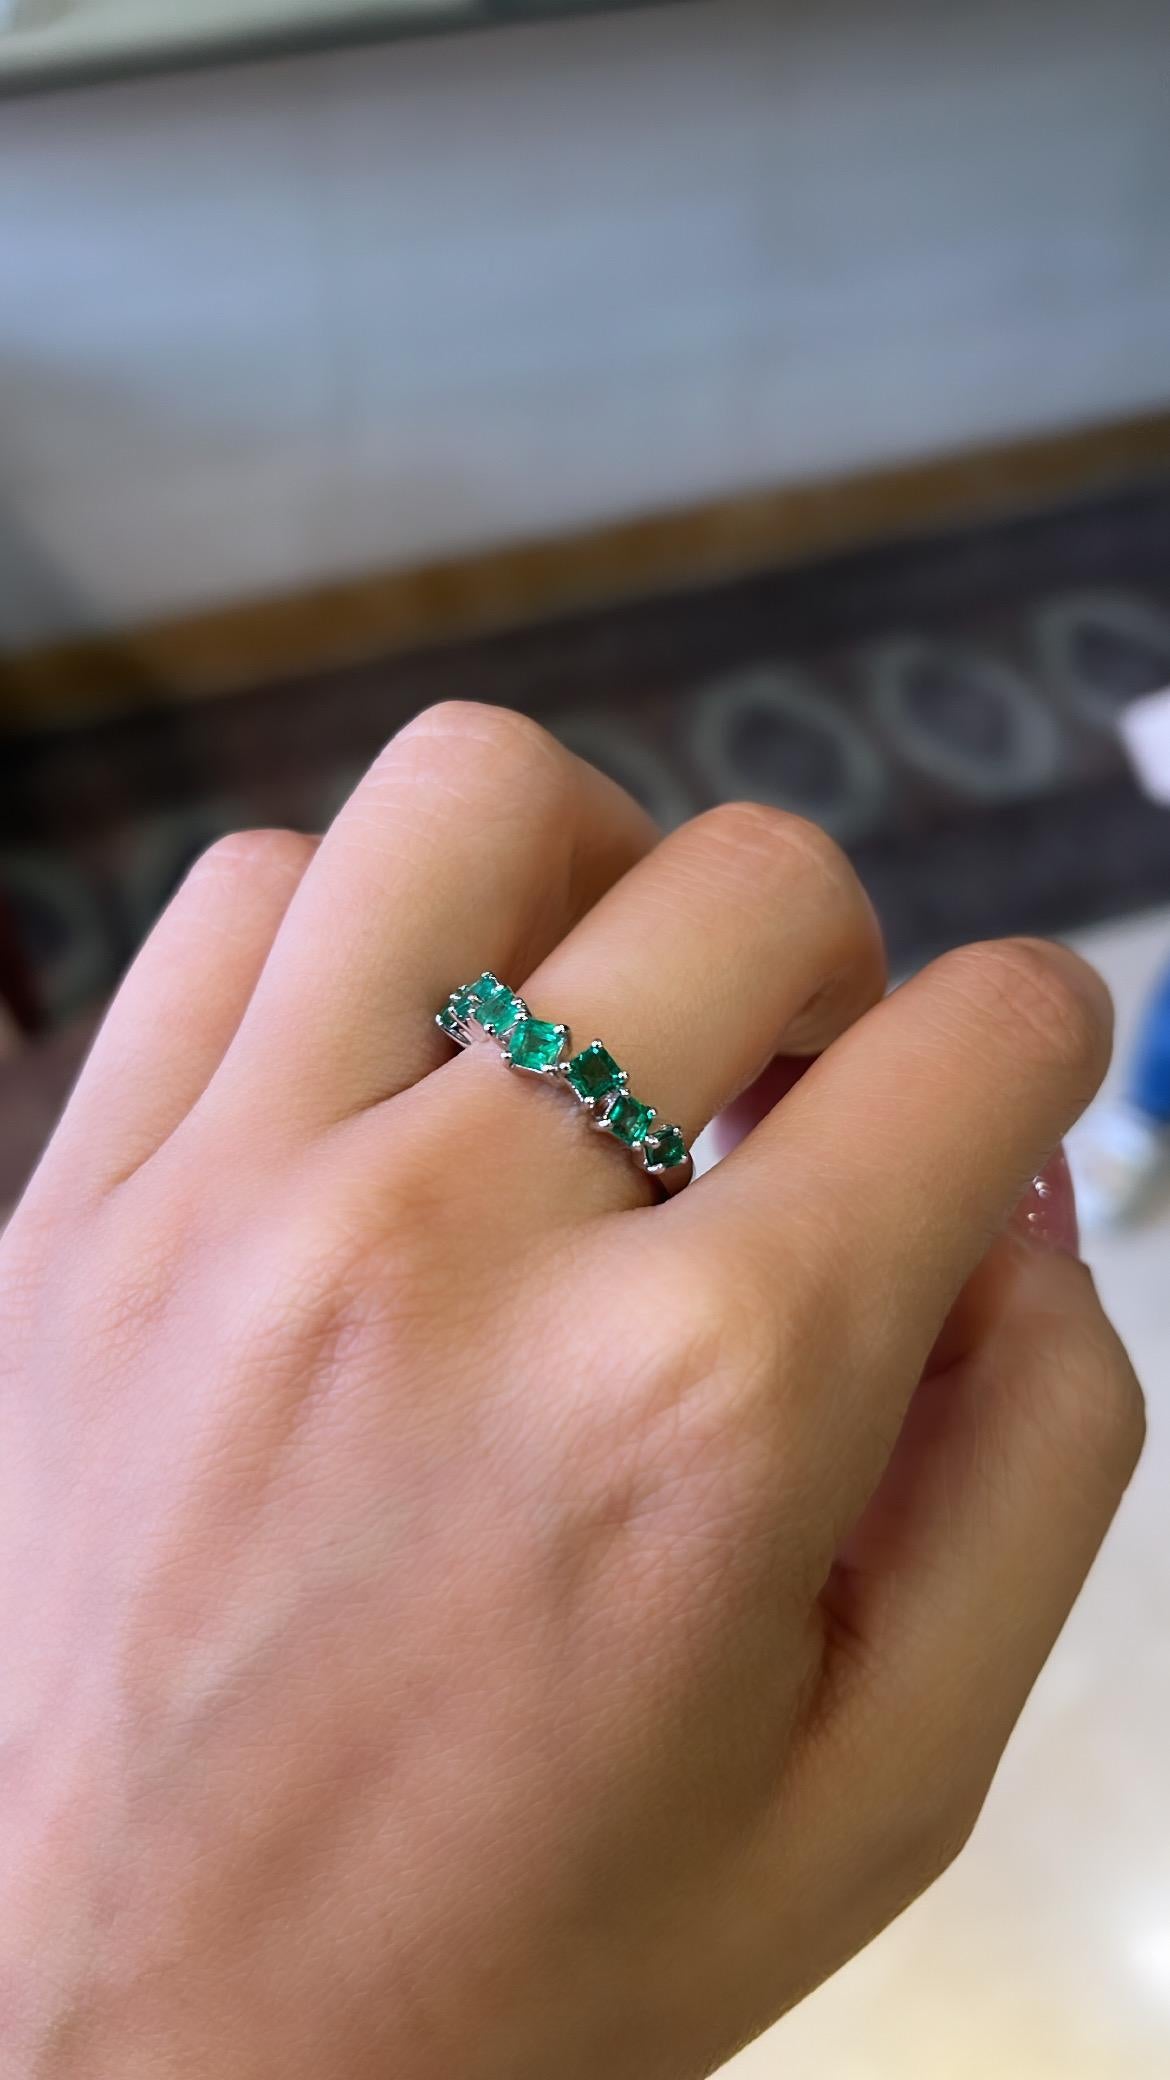 A very gorgeous Emerald Band Ring set in 18K White Gold. The weight of the Emeralds is 1.02 carats. The Emeralds are completely natural, without any treatment and are of Zambian origin. Net Gold weight is 3.45 grams. The dimensions of the ring are